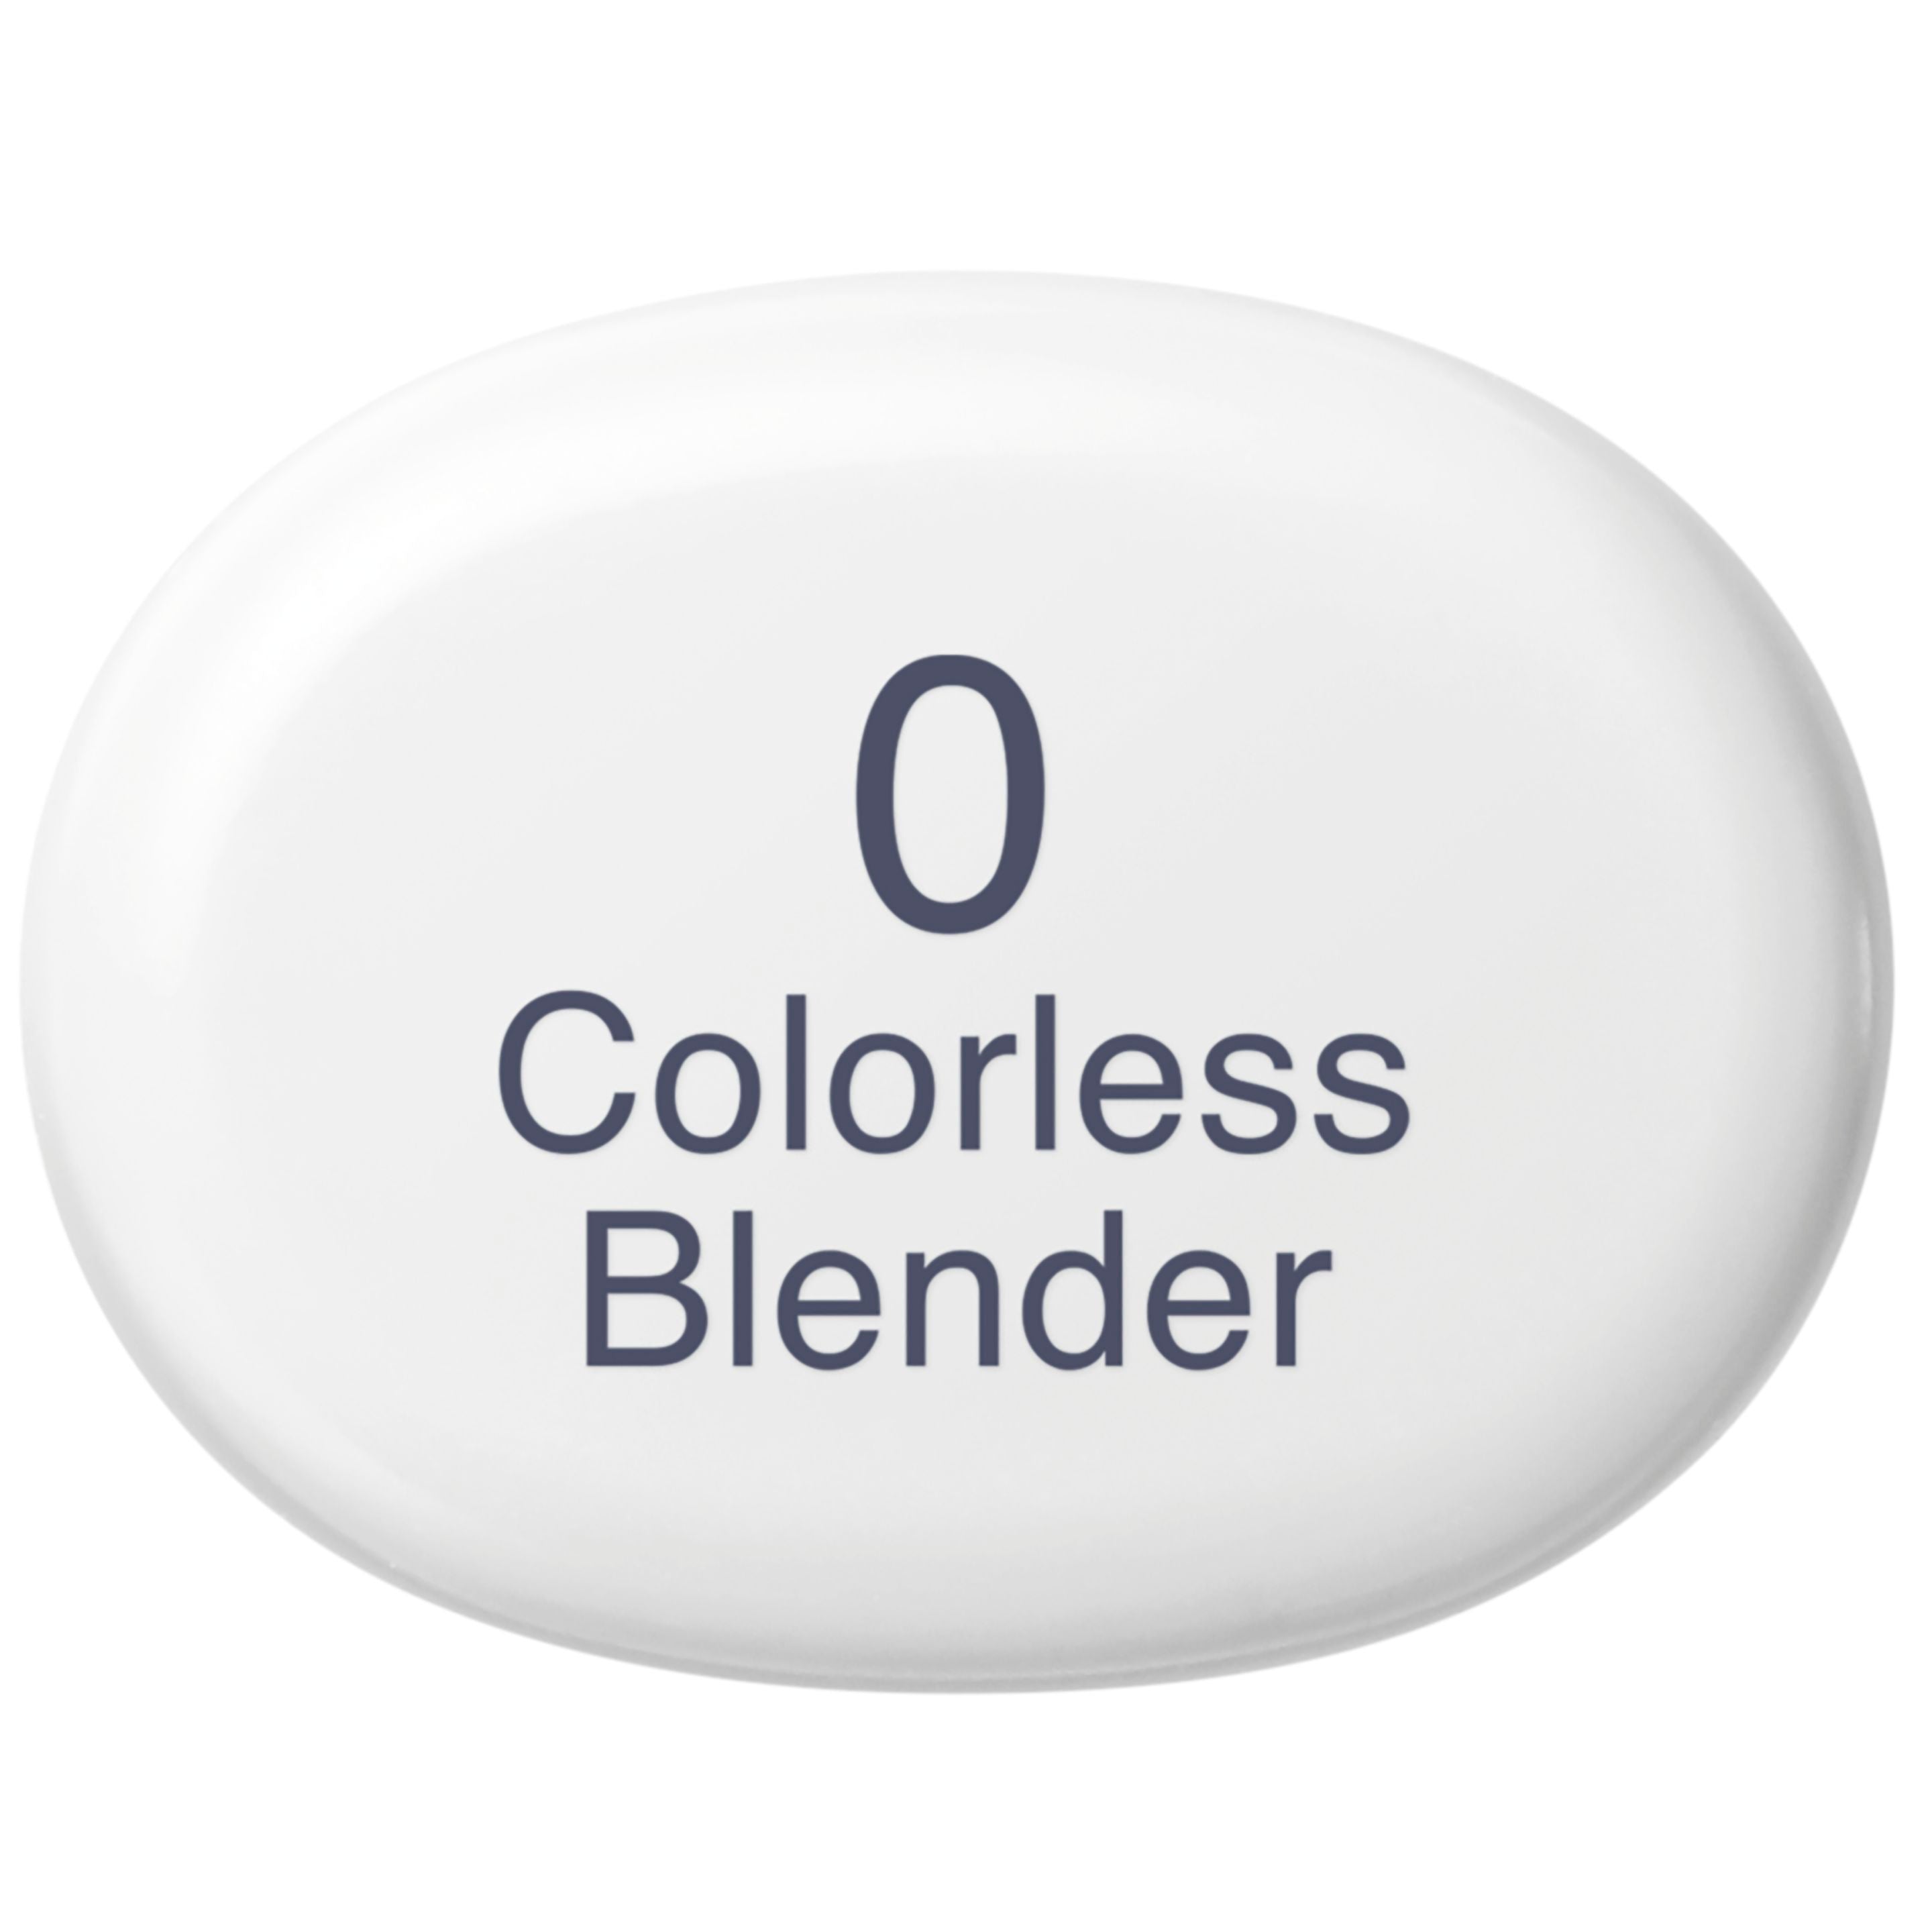 Intro to the 0 Colorless Blender